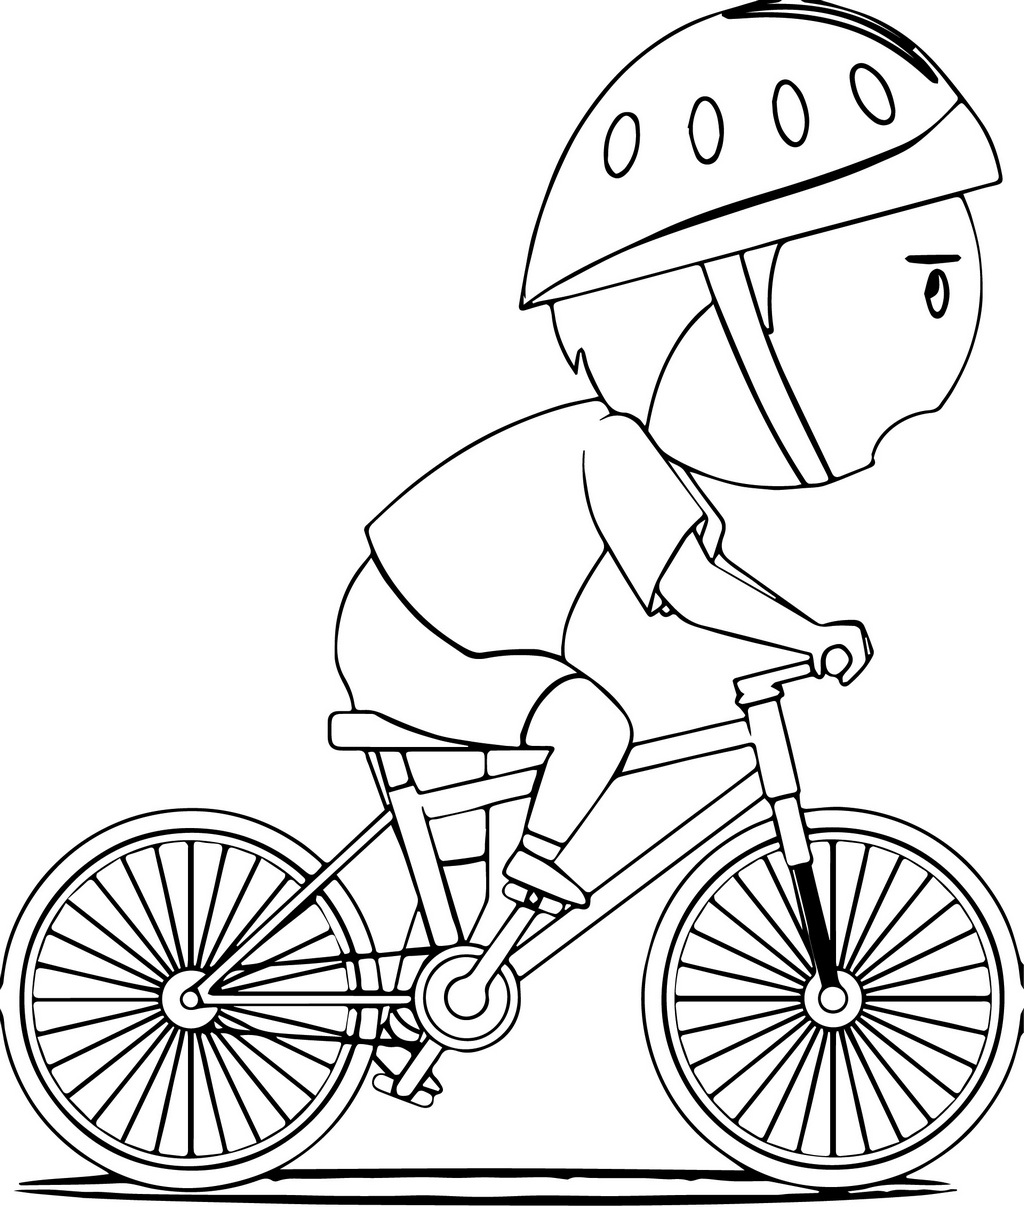 Bike And A Boy Coloring Page